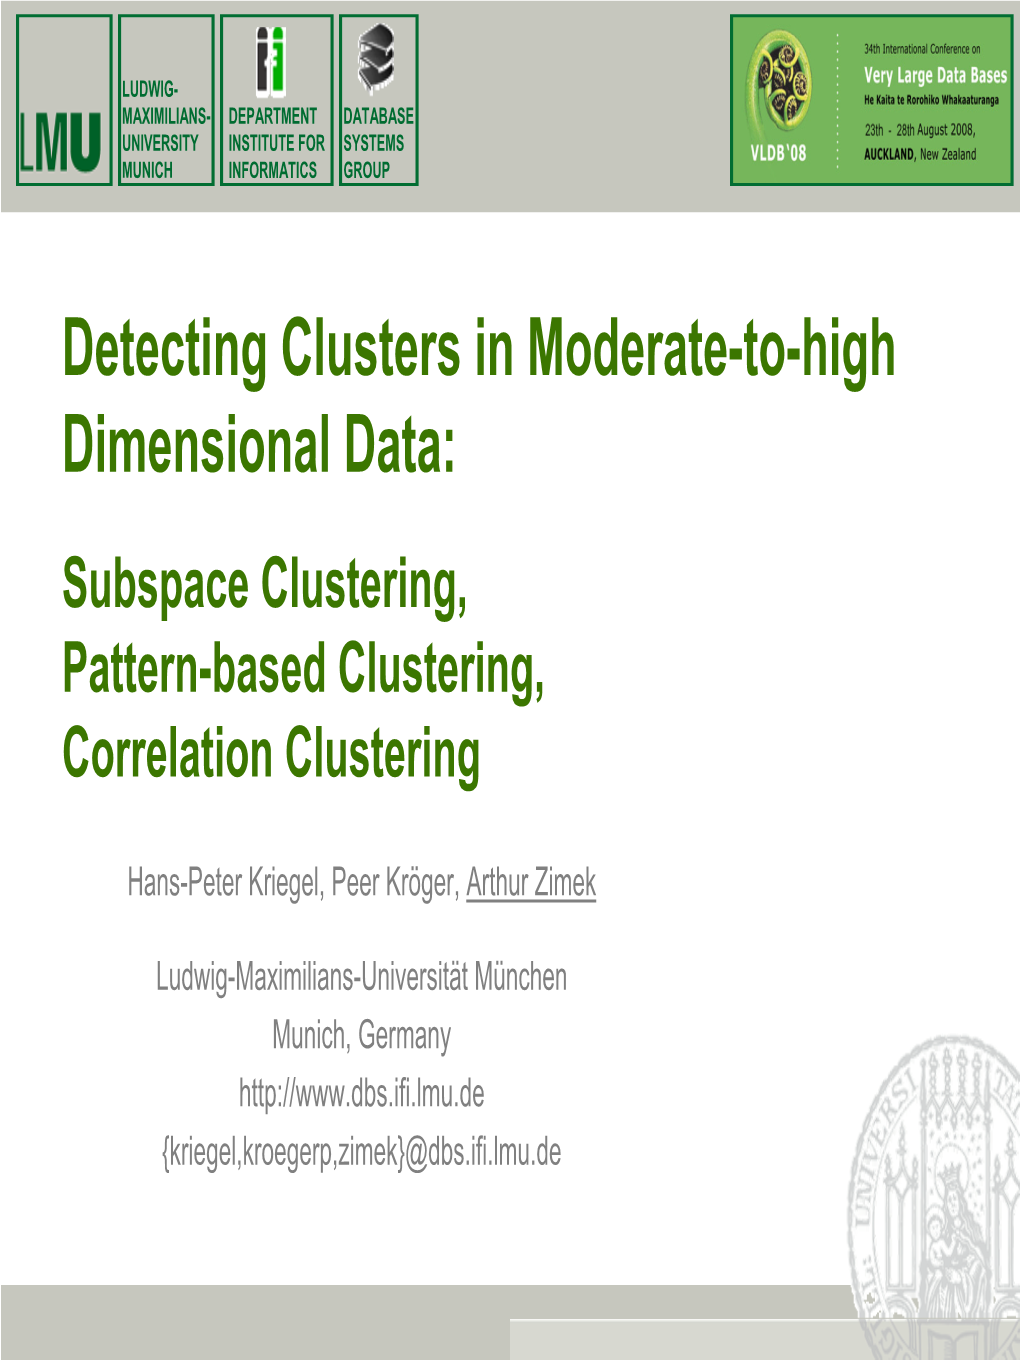 Detecting Clusters in Moderate-To-High Dimensional Data: Subspace Clustering, Pattern-Based Clustering, Correlation Clustering